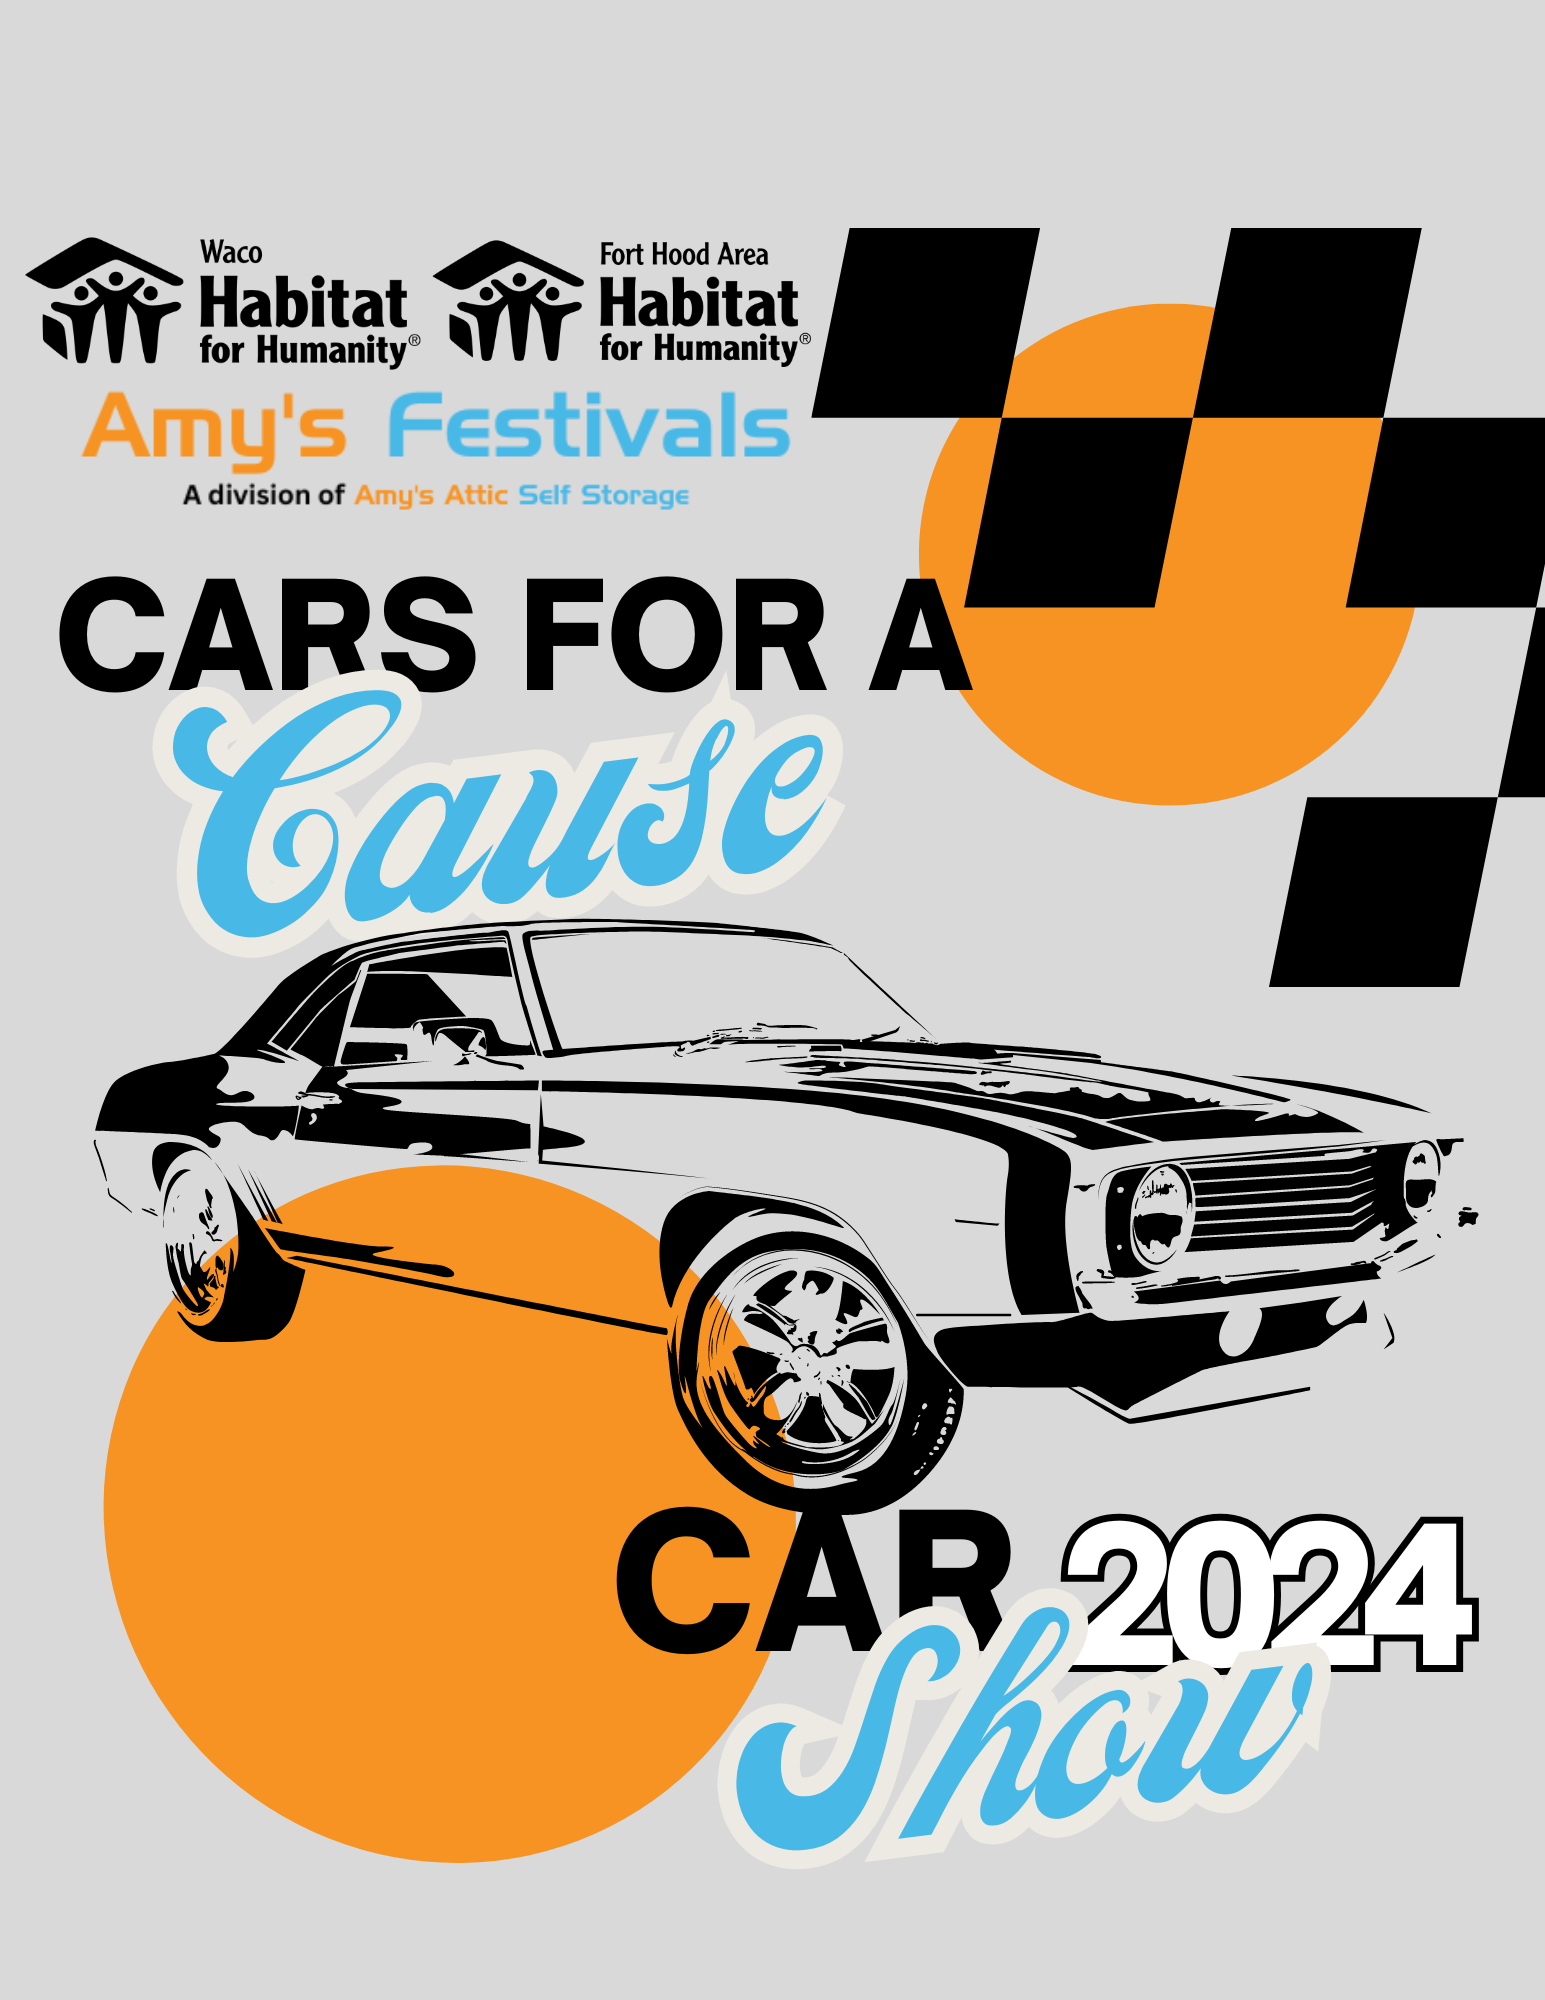 Amy’s Attic Self Storage’s Cars for a Cause 2024